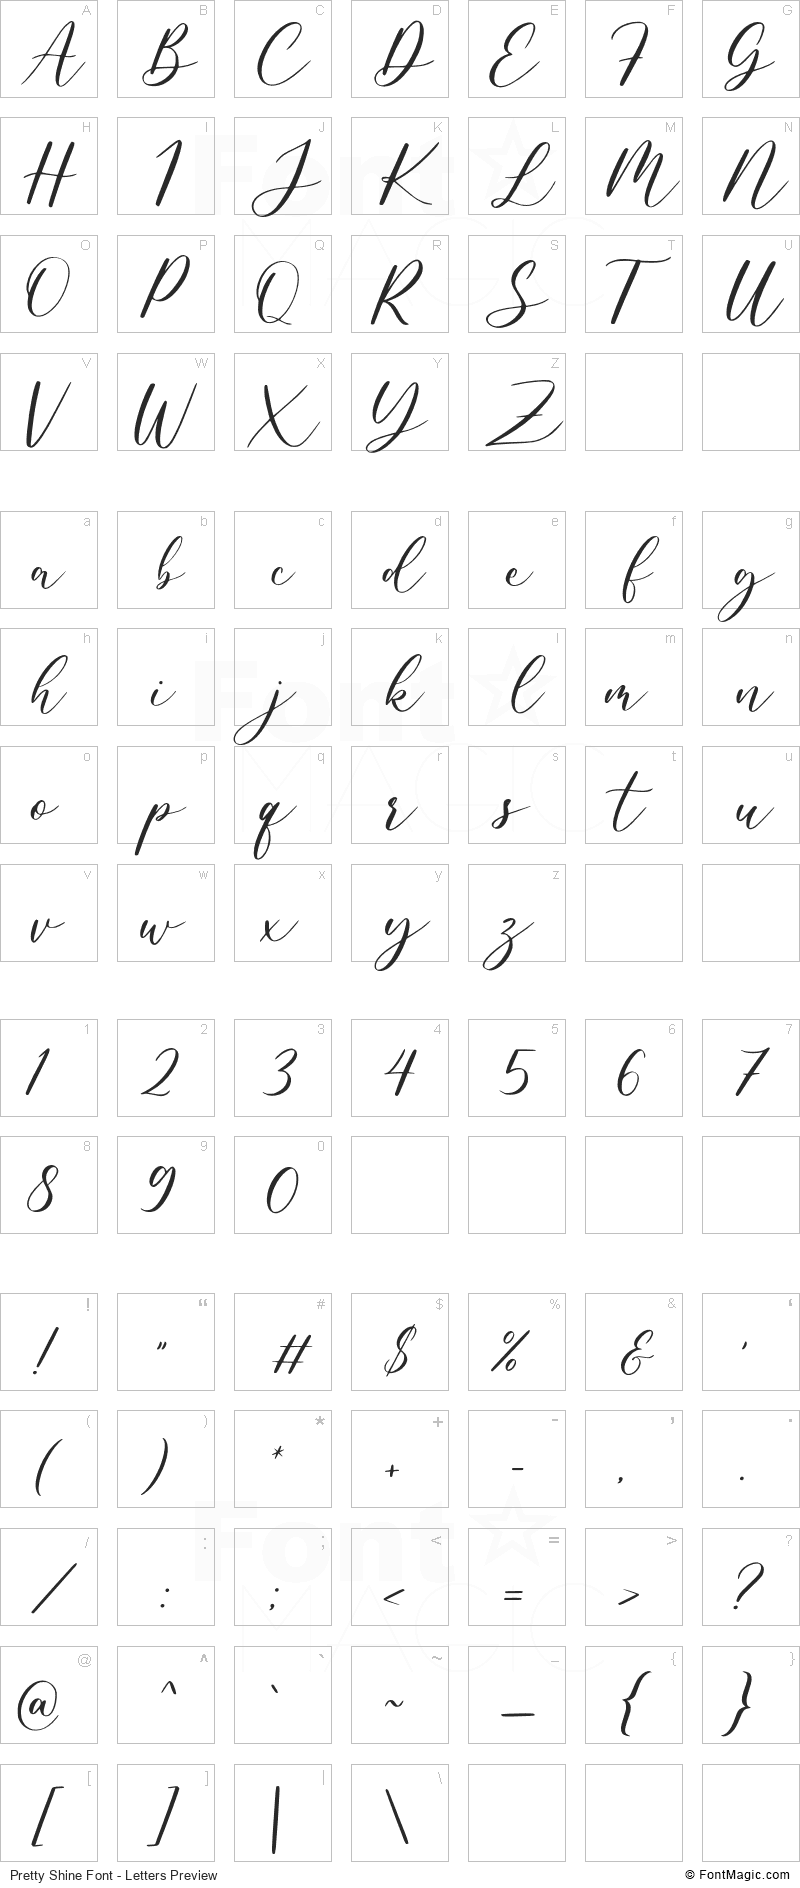 Pretty Shine Font - All Latters Preview Chart